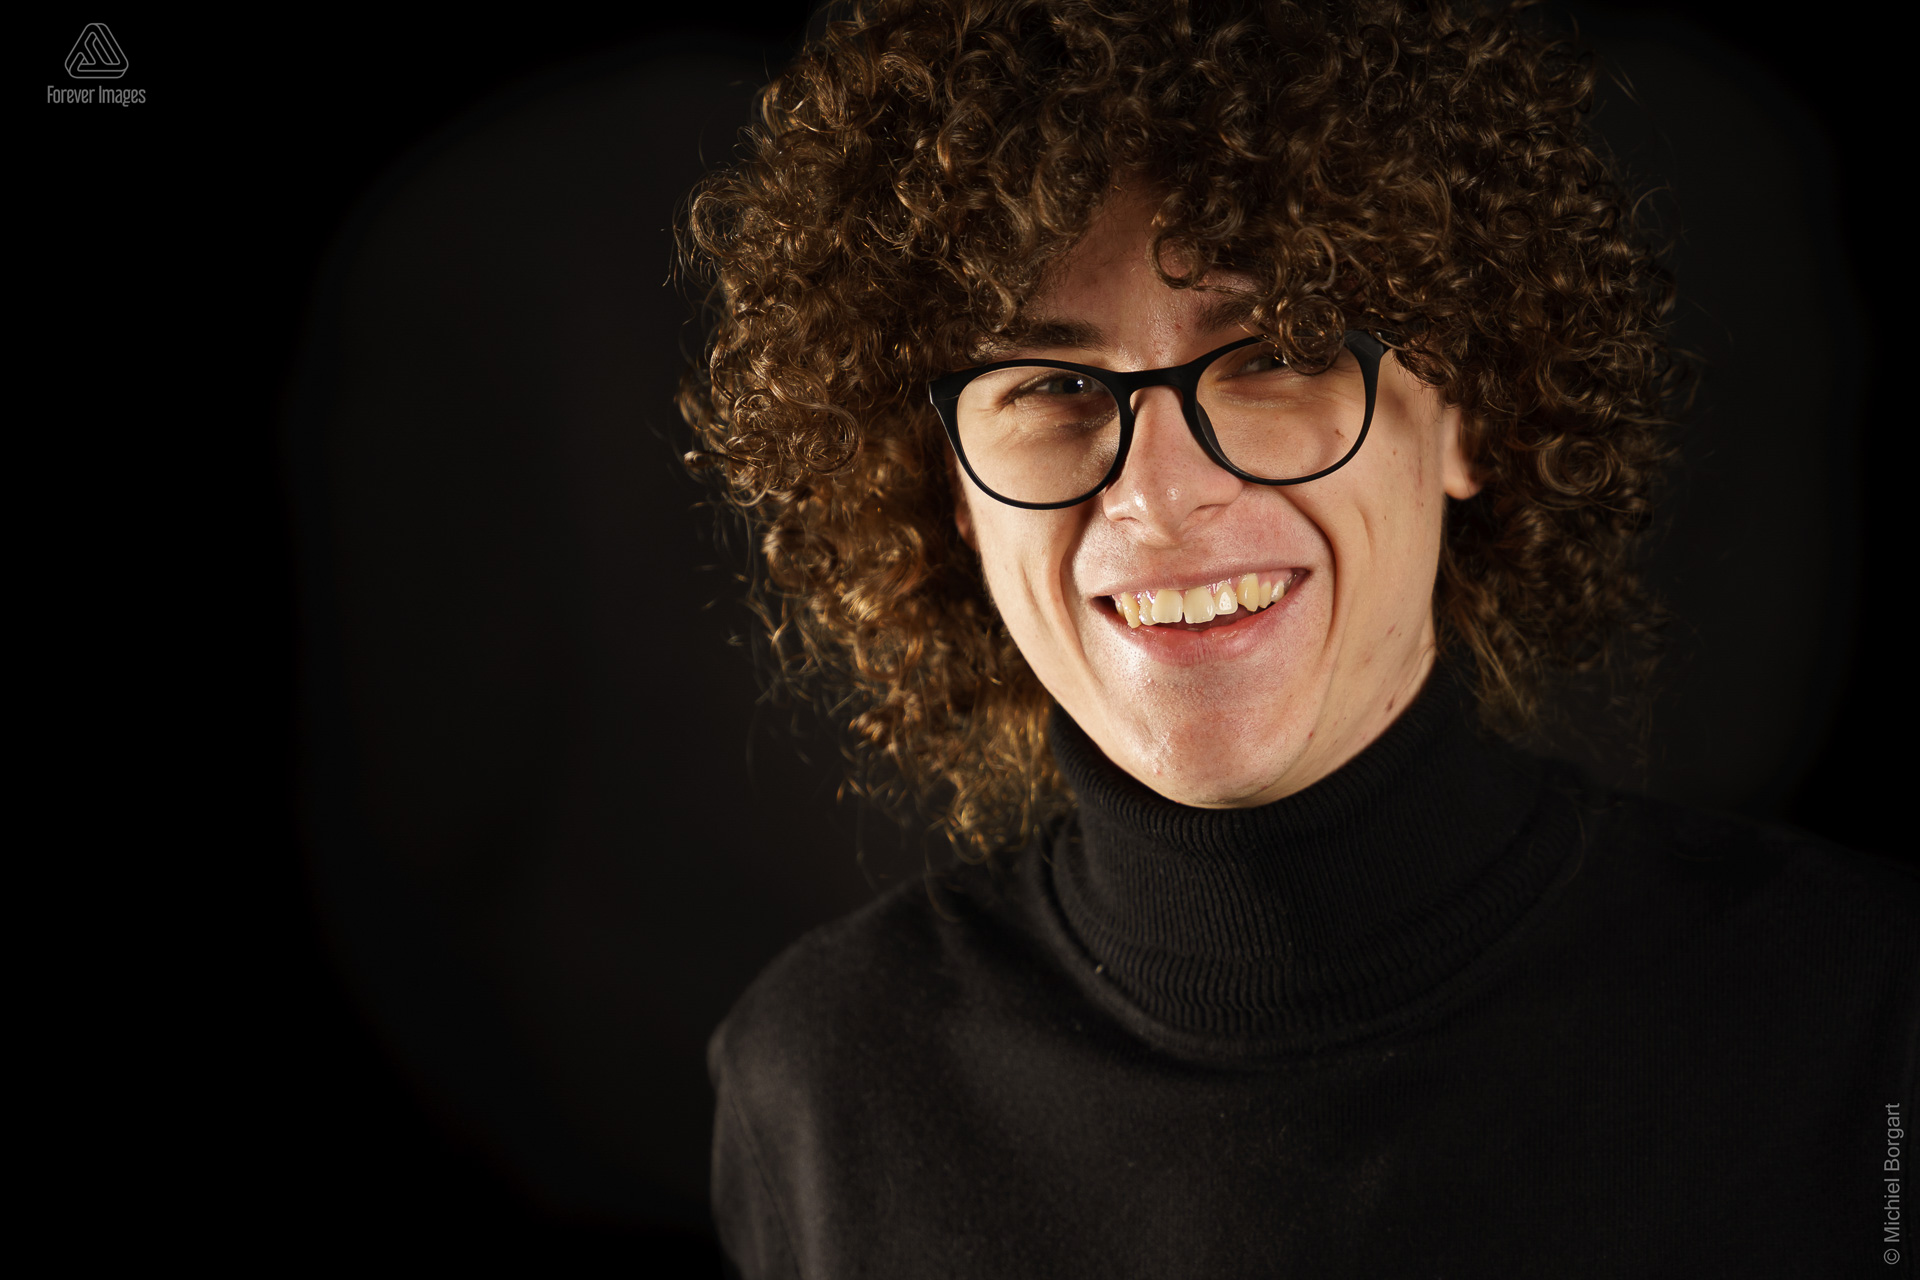 Portrait photo young man with black turtleneck glasses and long curly hair | Andreas | Portrait Photographer Michiel Borgart - Forever Images.